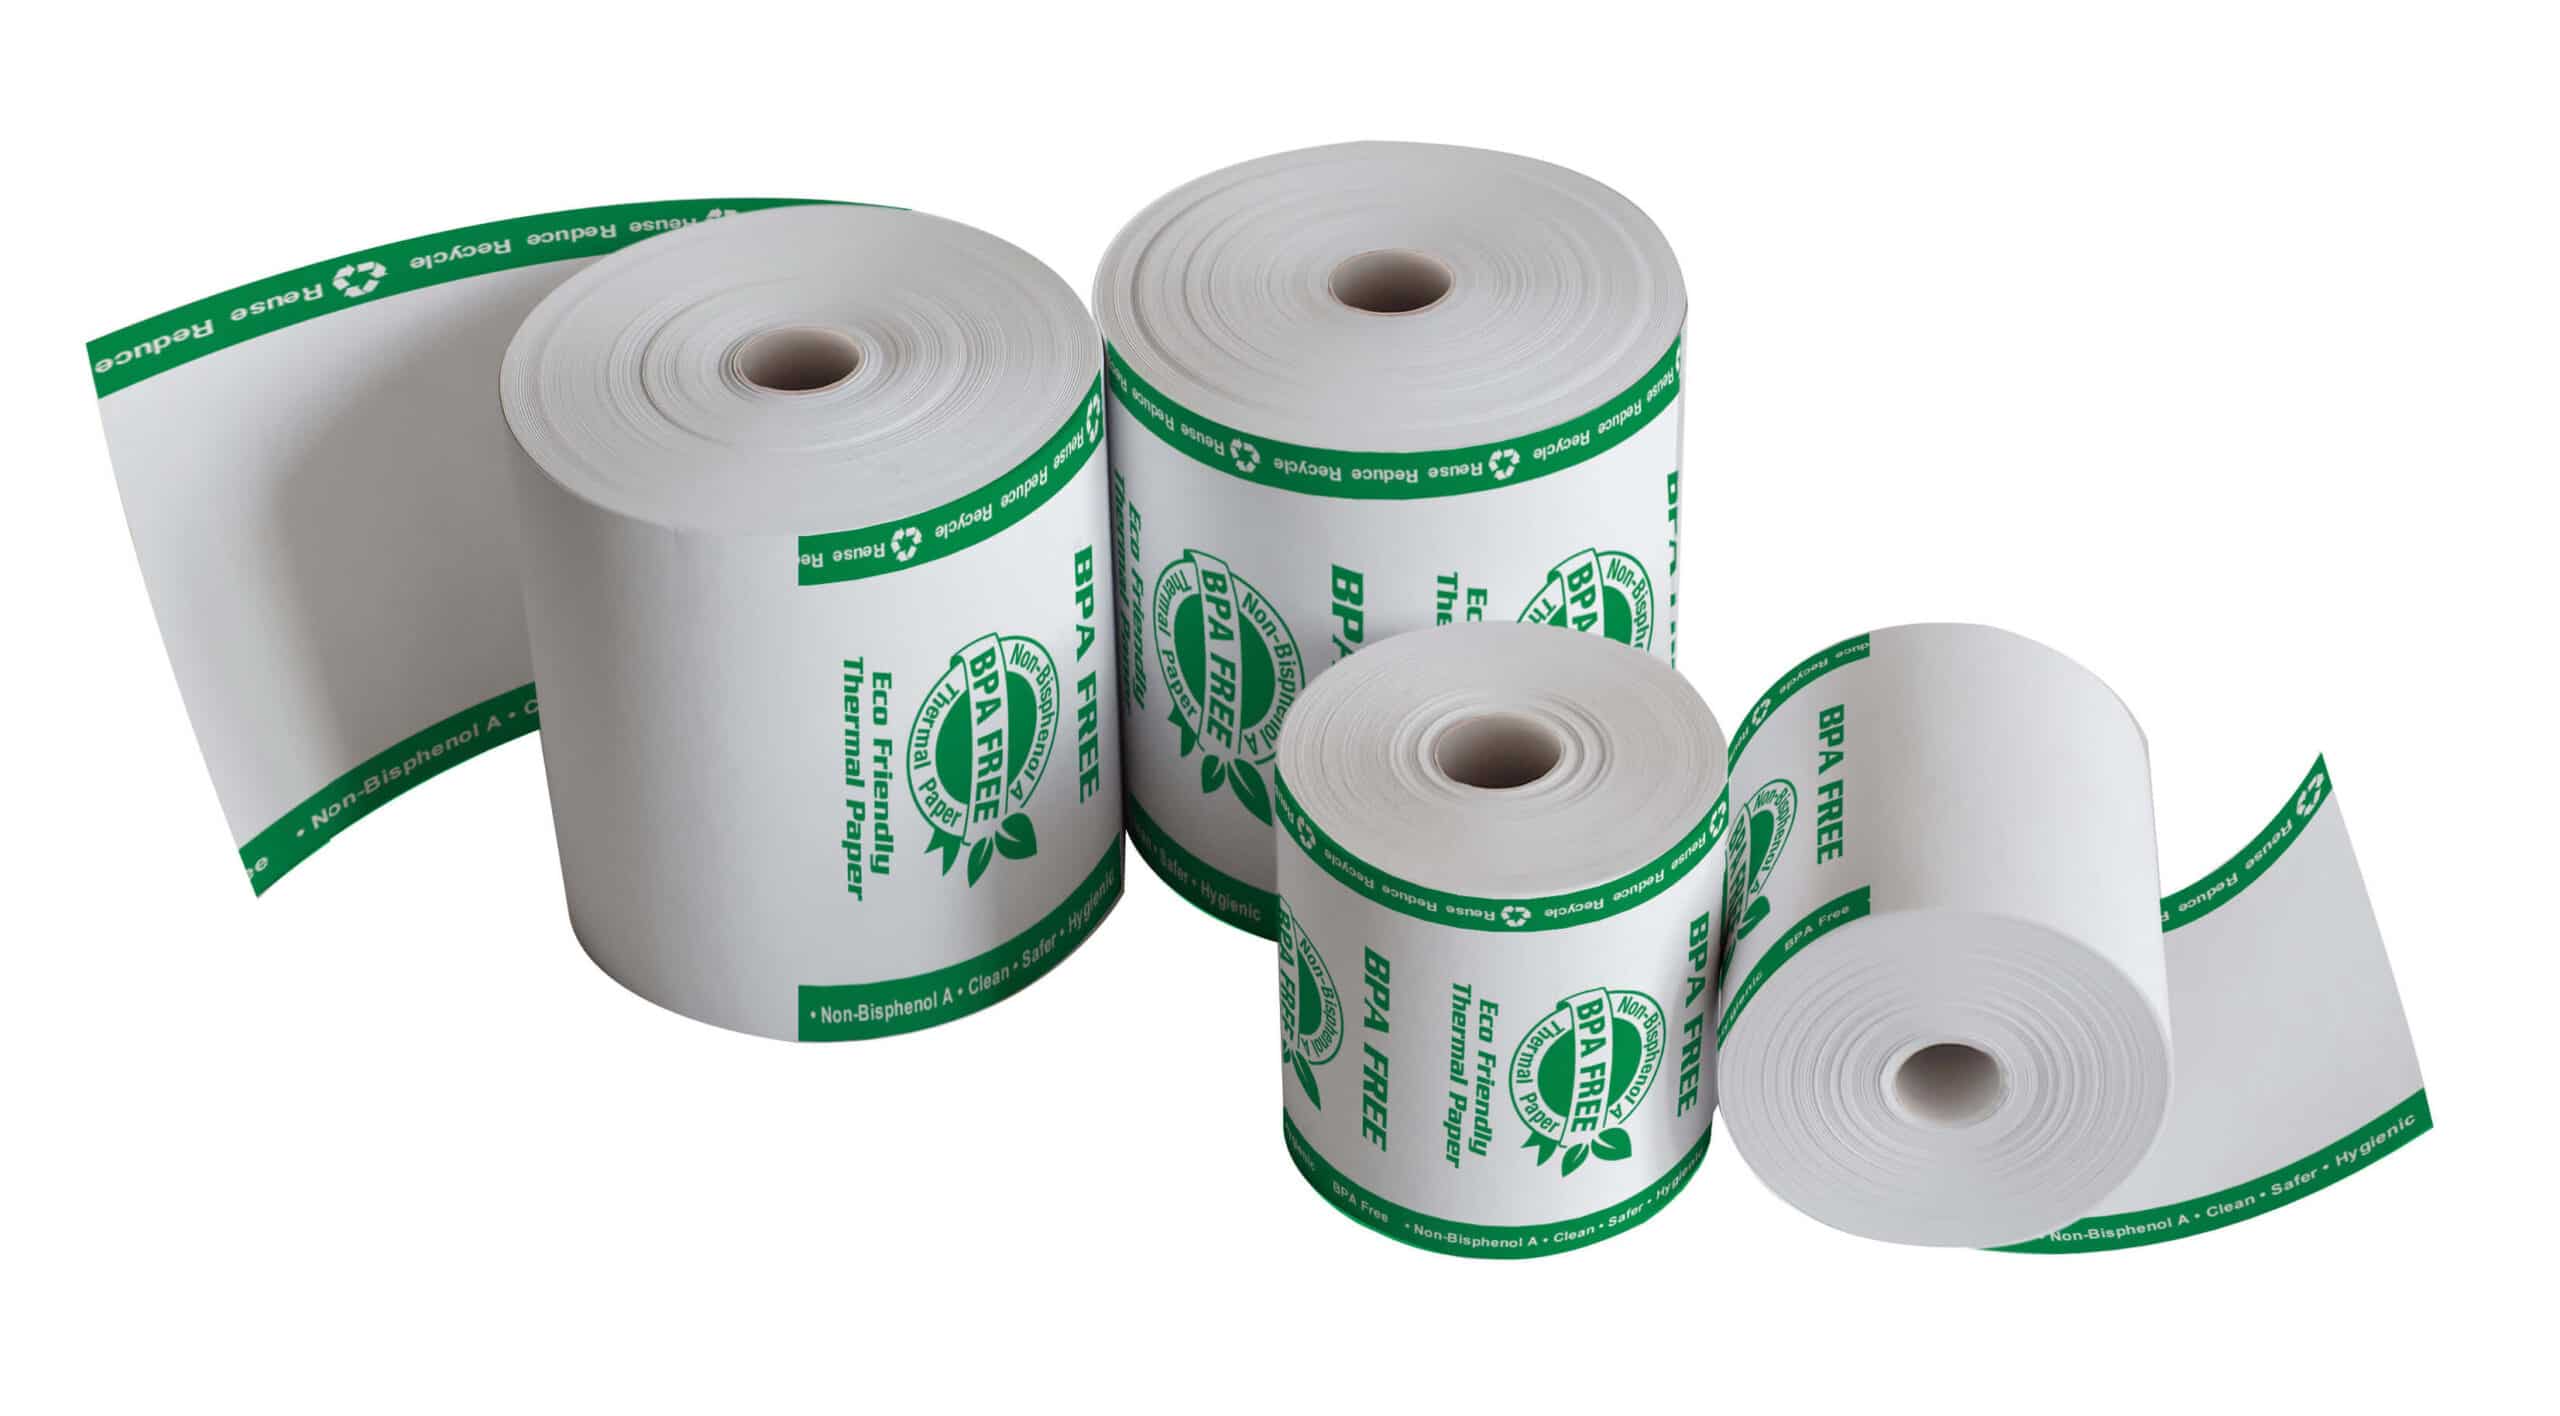 Moving away from BPA in Thermal Paper